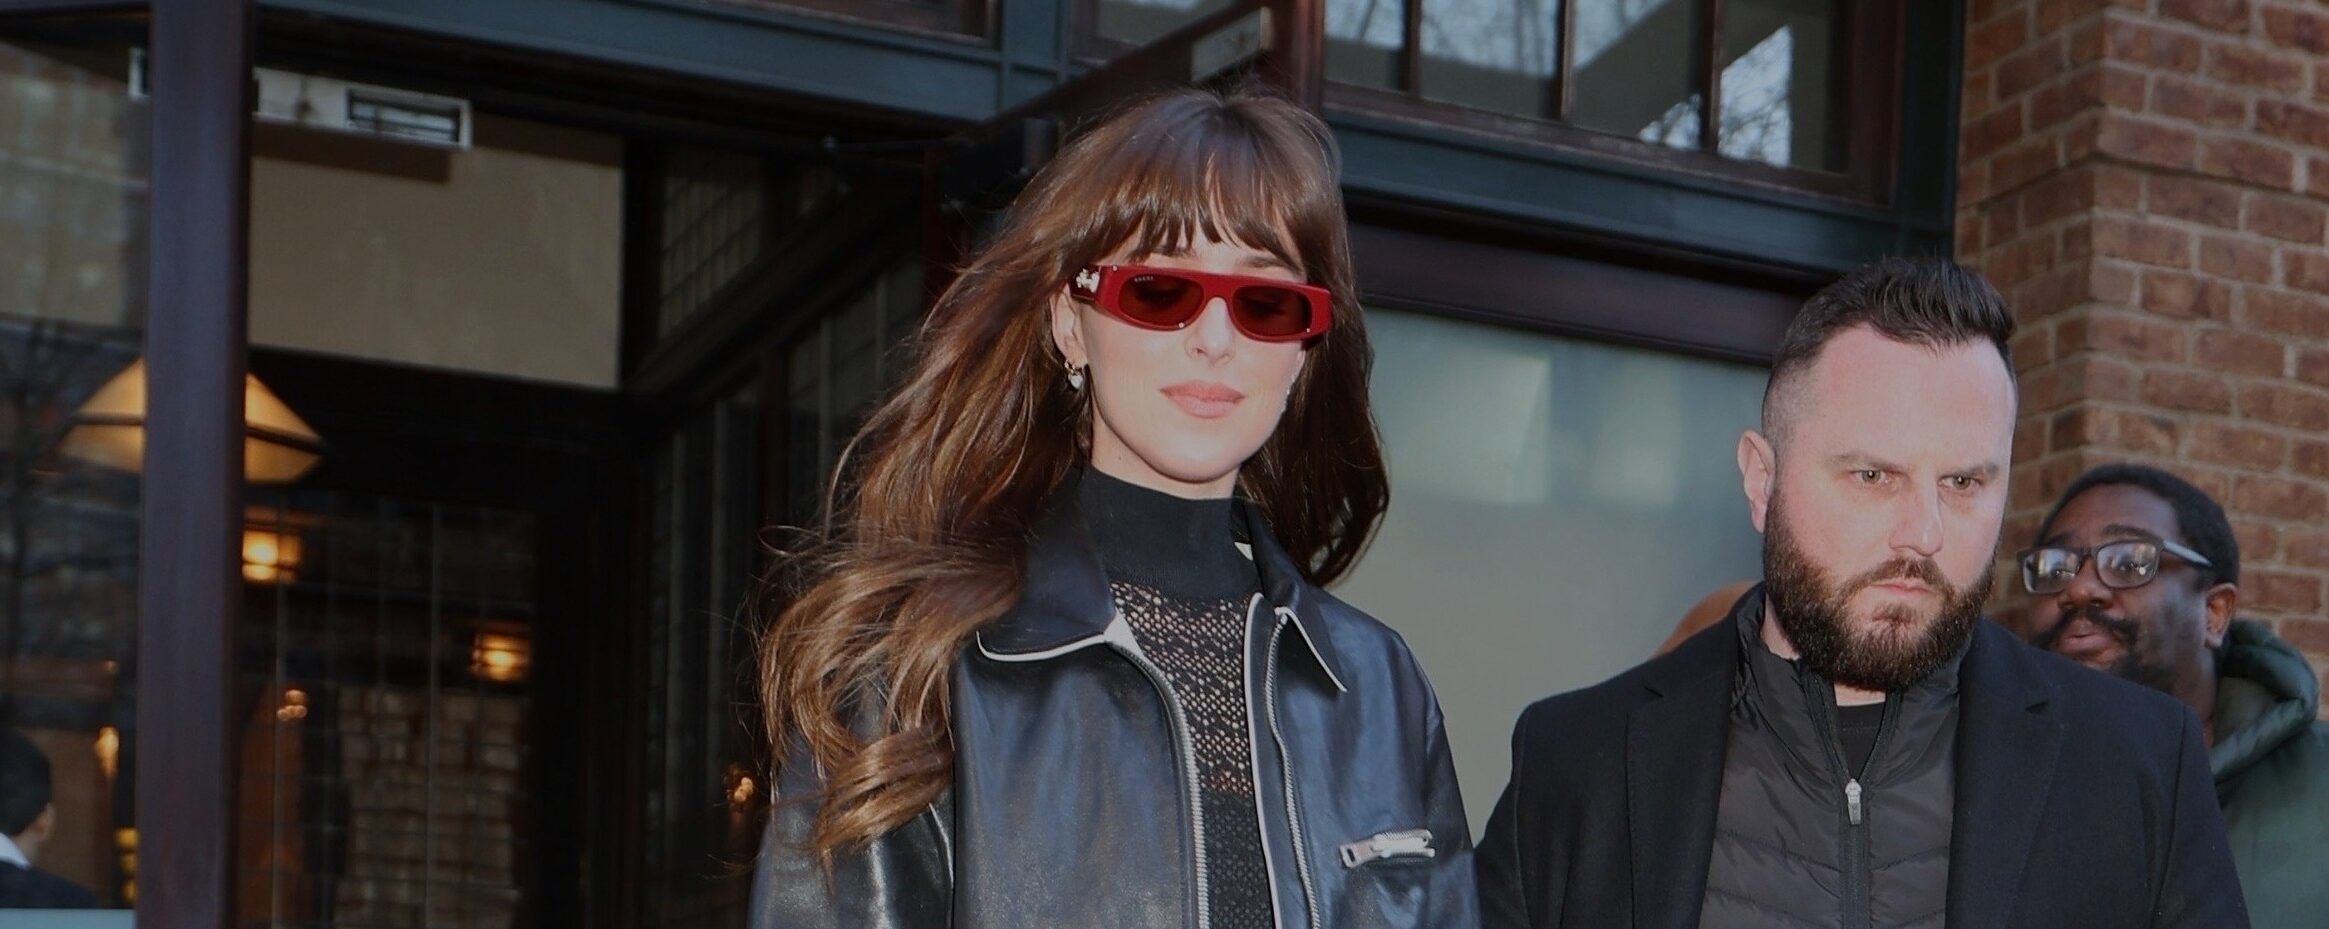 Dakota Johnson steps out onto a city street dressed in a black leather jacket over a black turtleneck and a shimmering long skirt. She accessorizes with red sunglasses, a matching red handbag, and black heeled boots, exuding a chic, modern look.